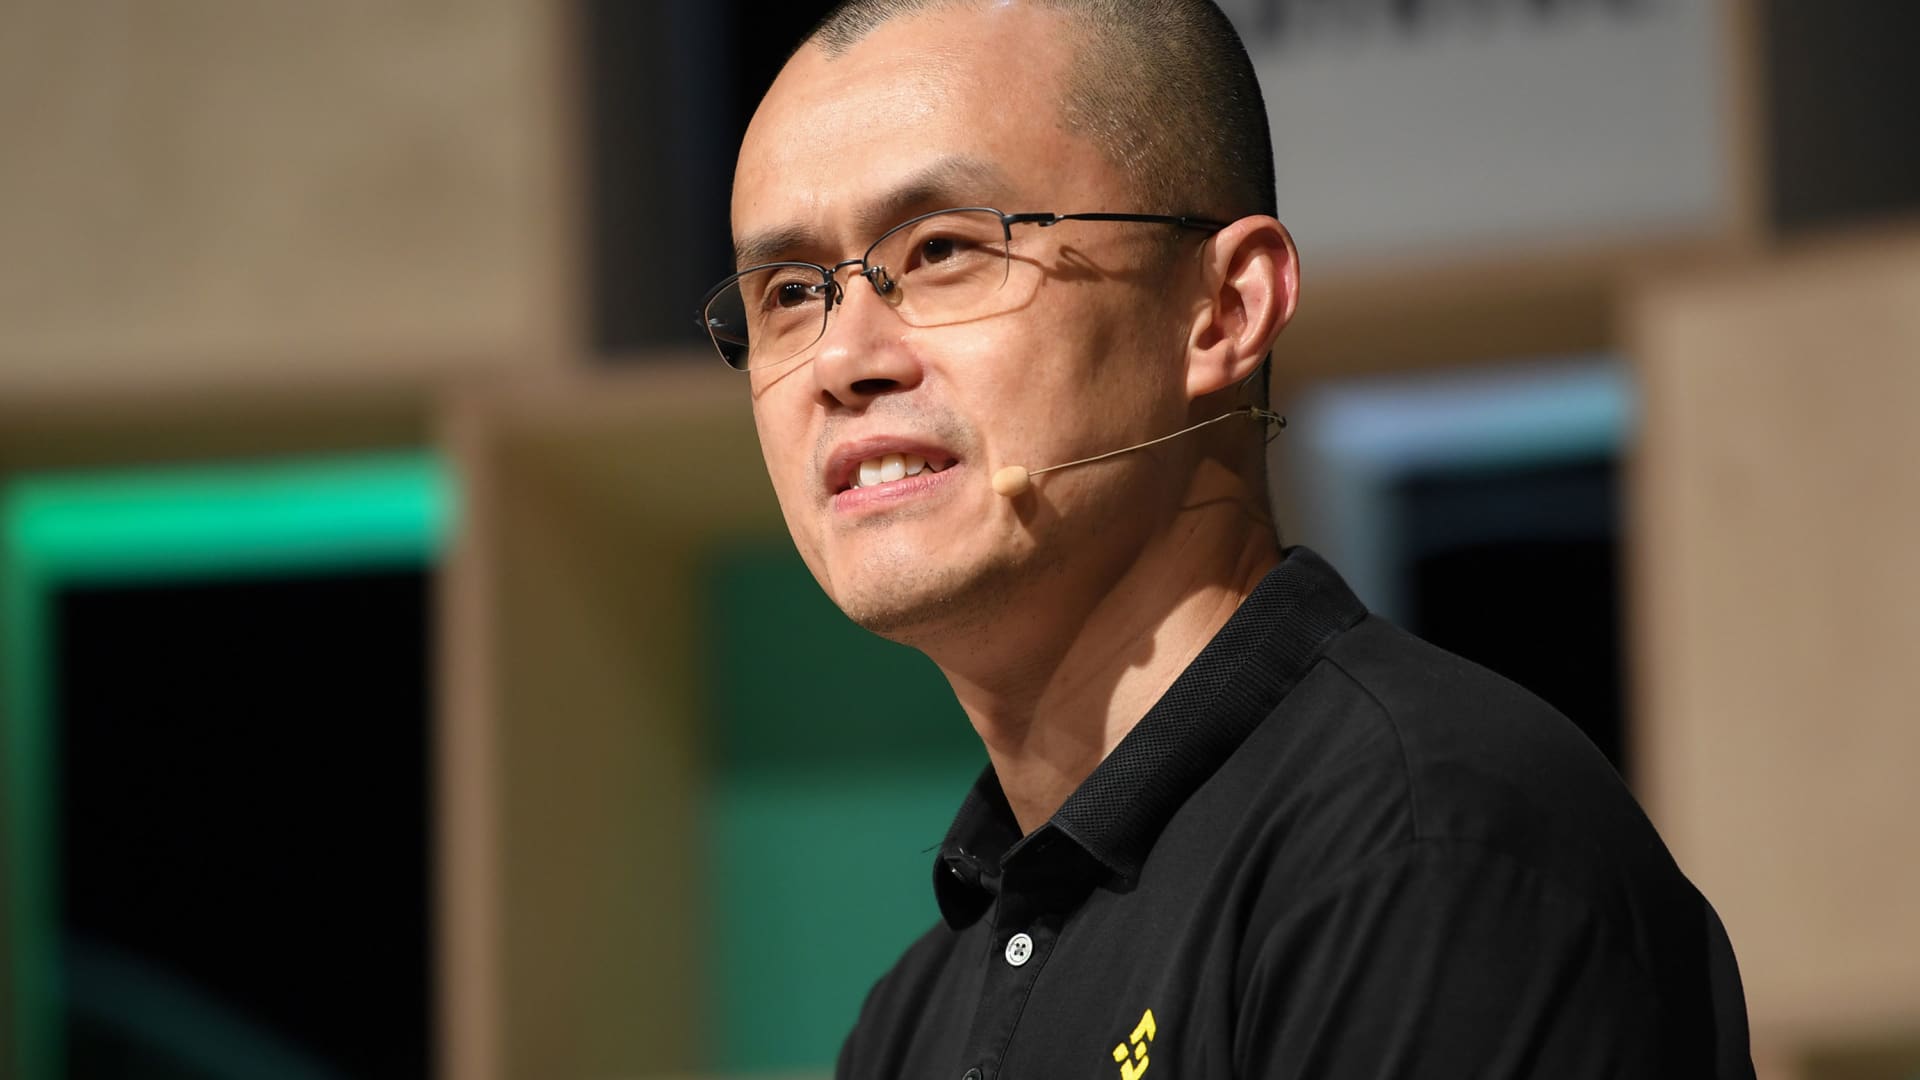 Investors pull 0 million from crypto exchange Binance after SEC charges